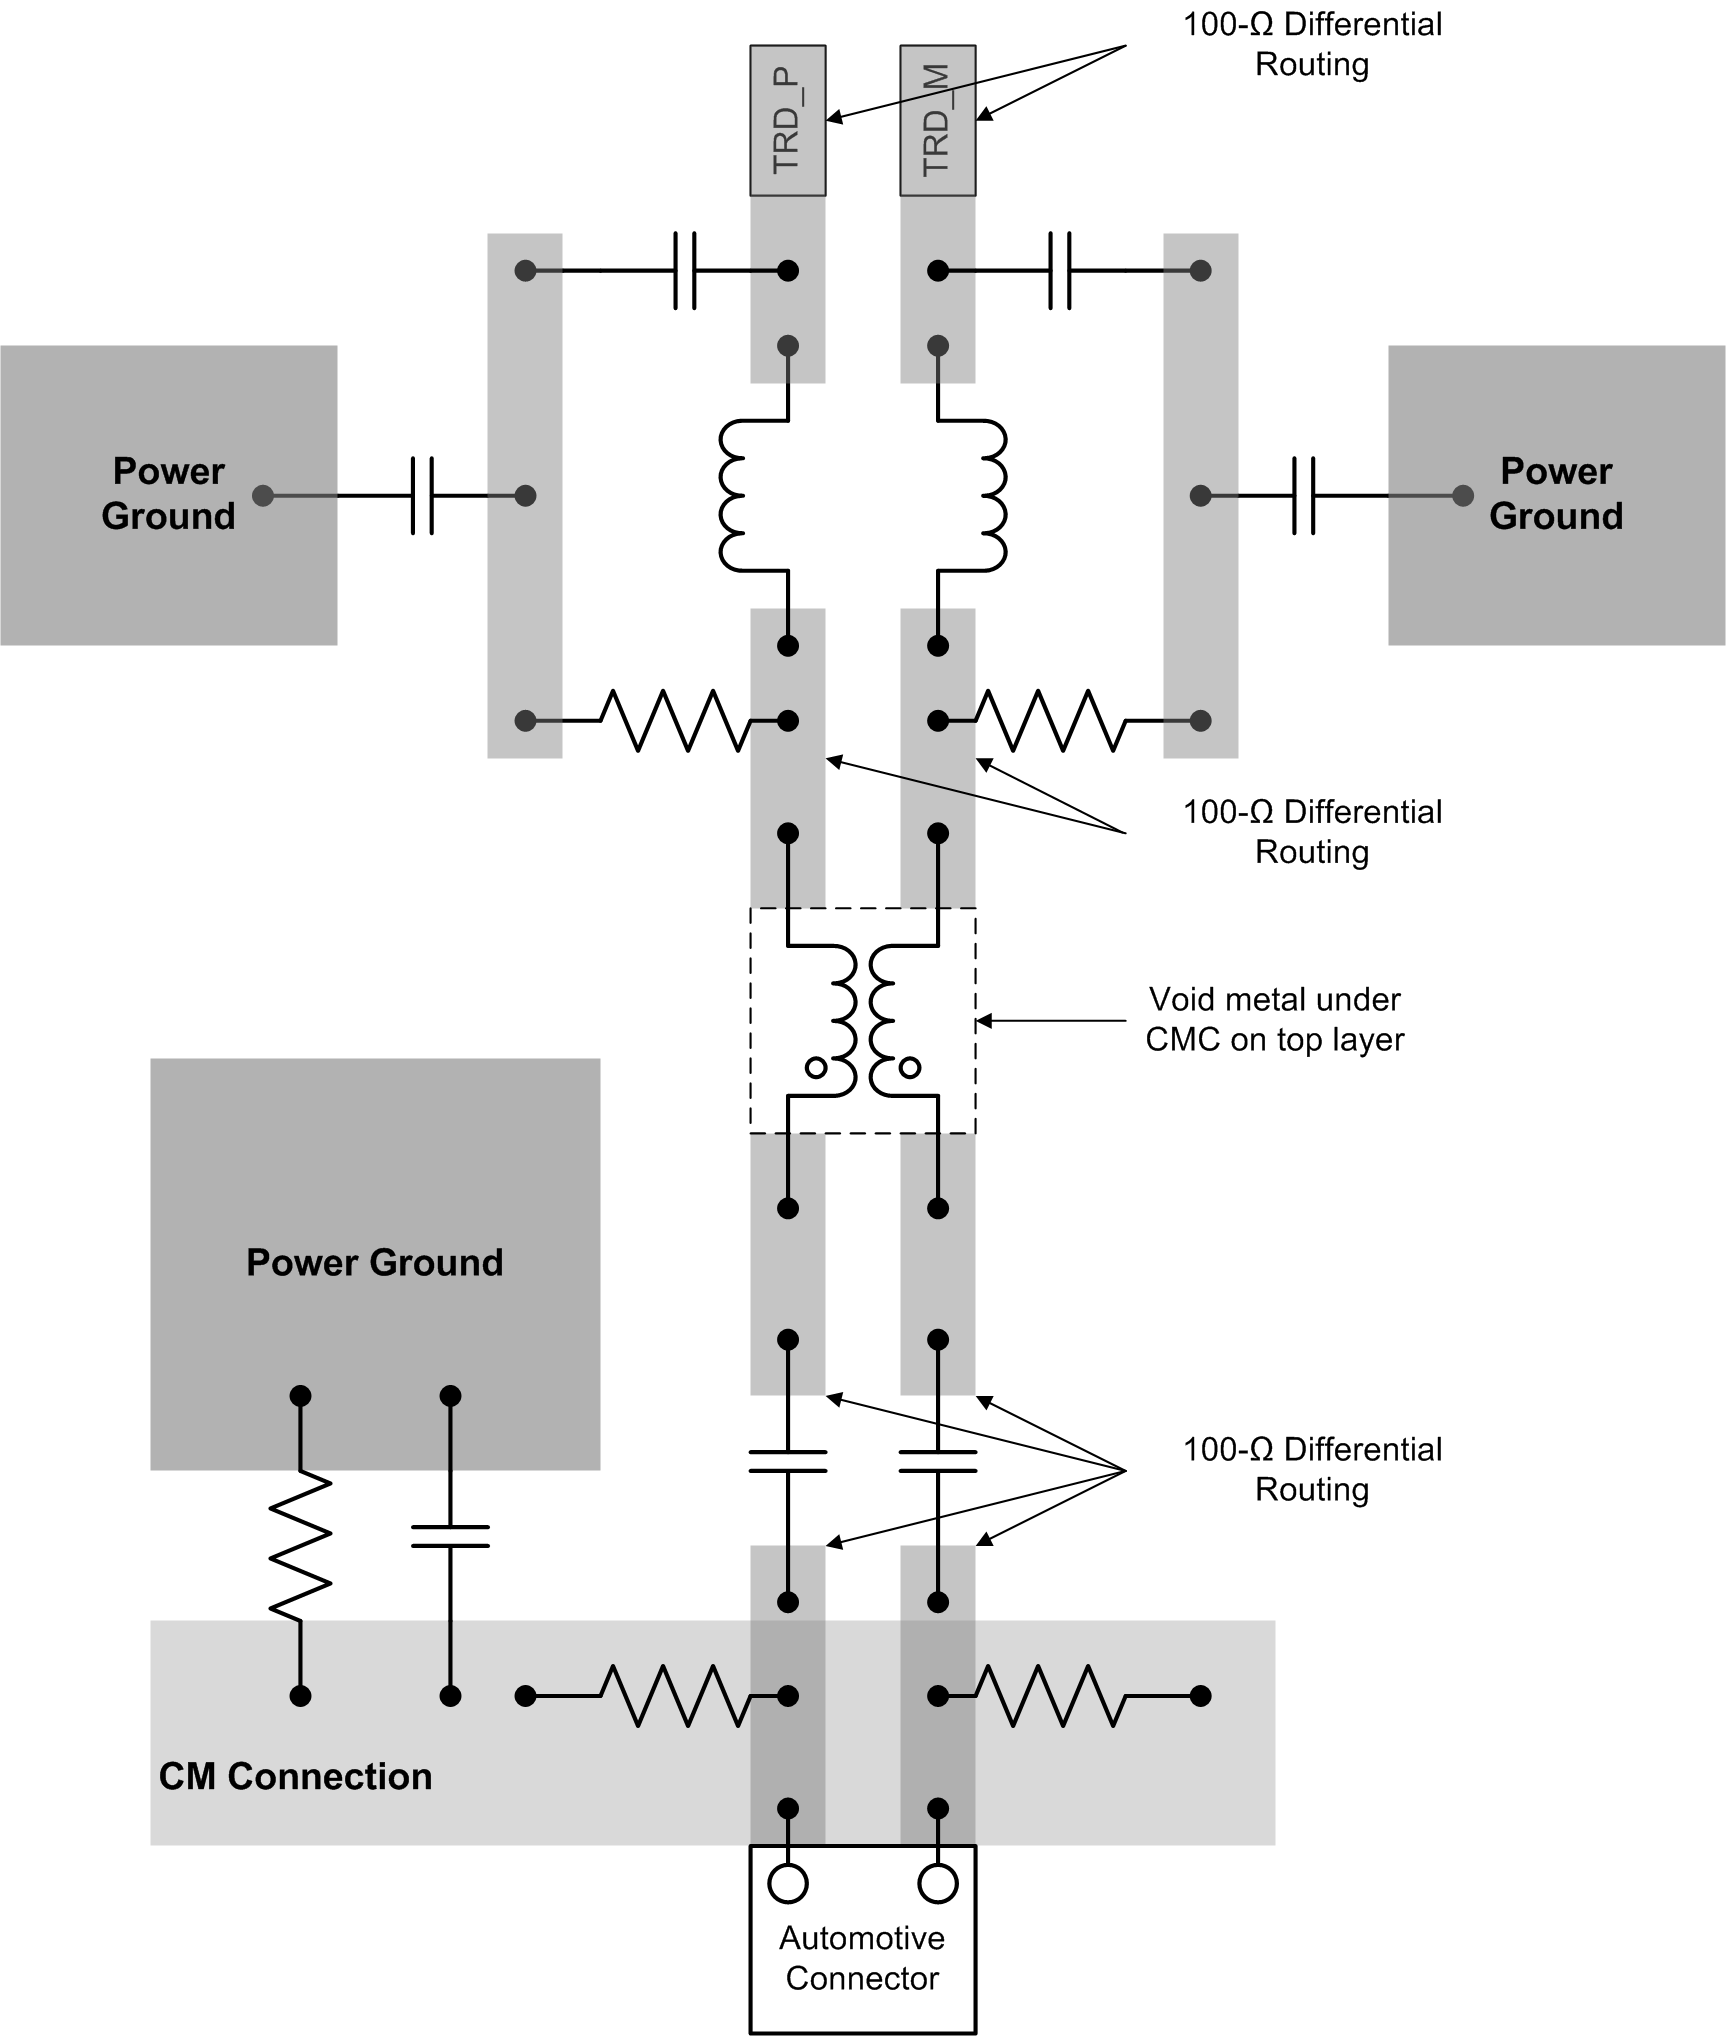 DP83TC811-Q1 MDI Low-Pass Filter Layout Recommendation